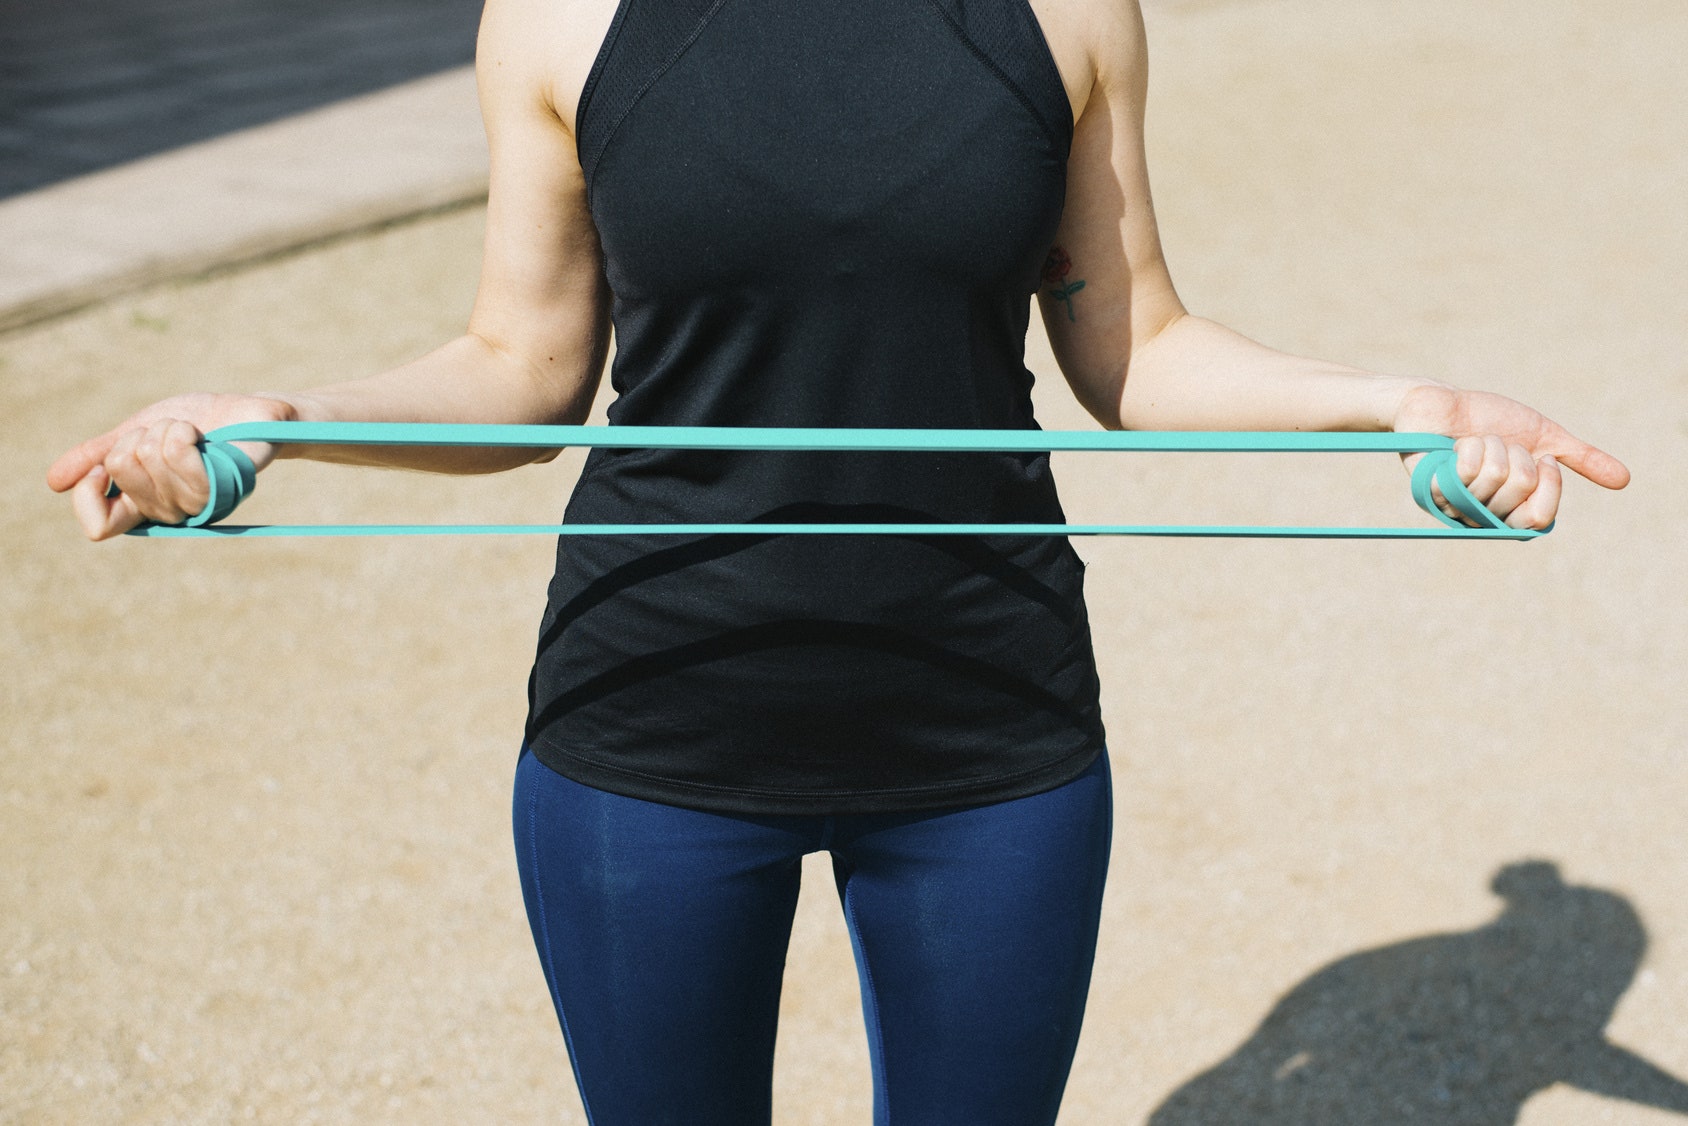 5 Advantages of Resistance Bands to Maximize Your At-House Workout